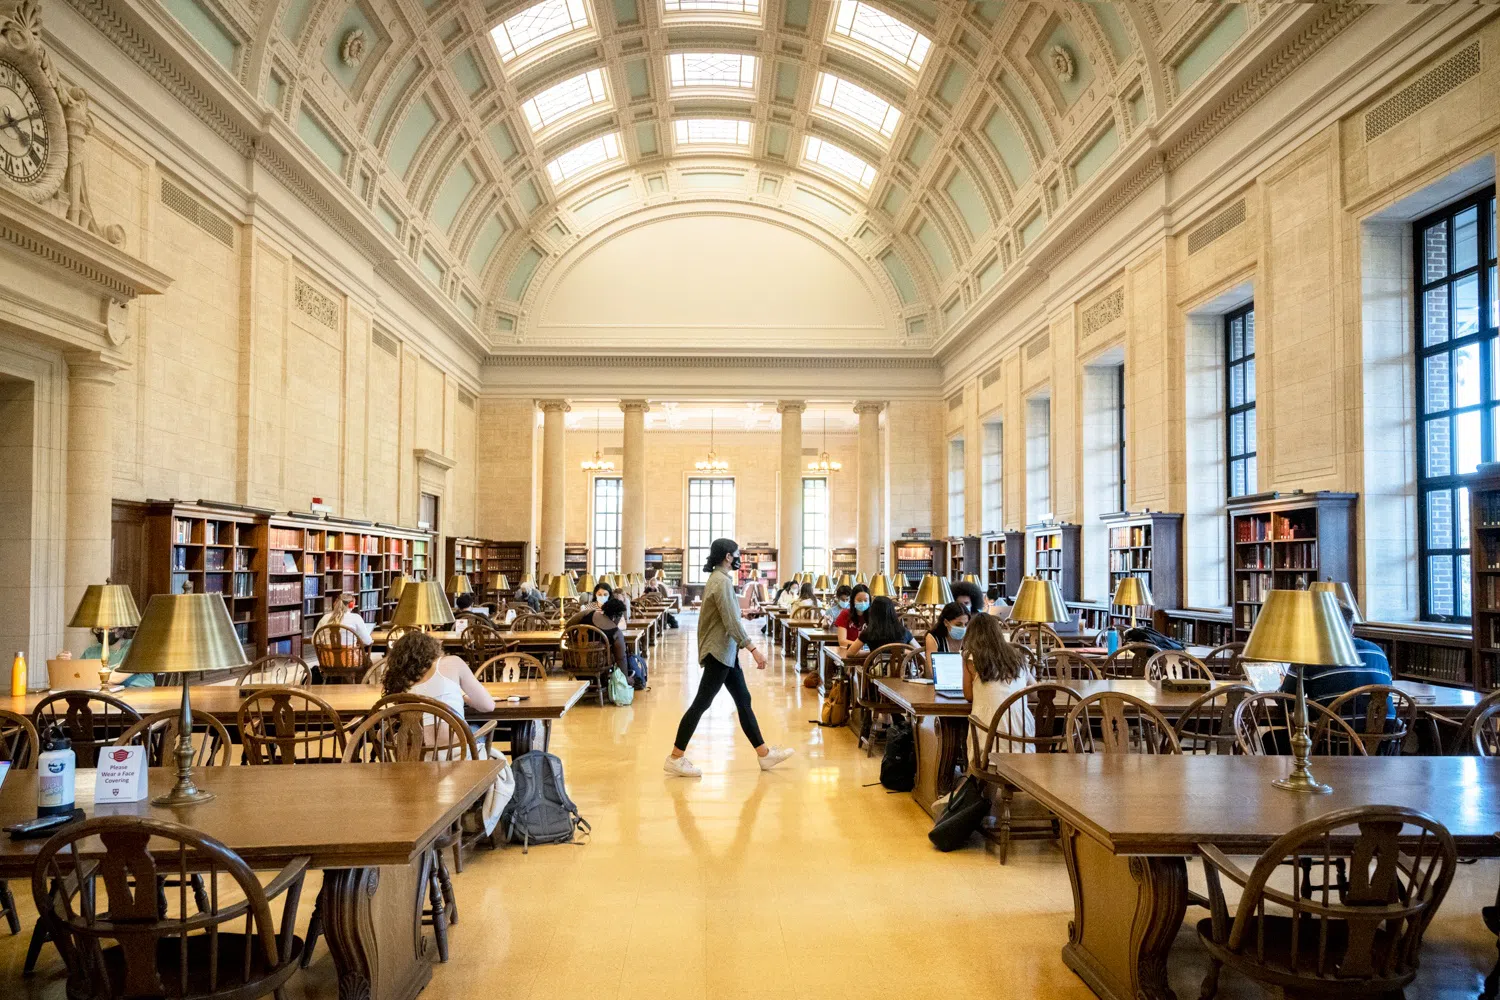 Students study at wooden tables in a well-lit domed library room.